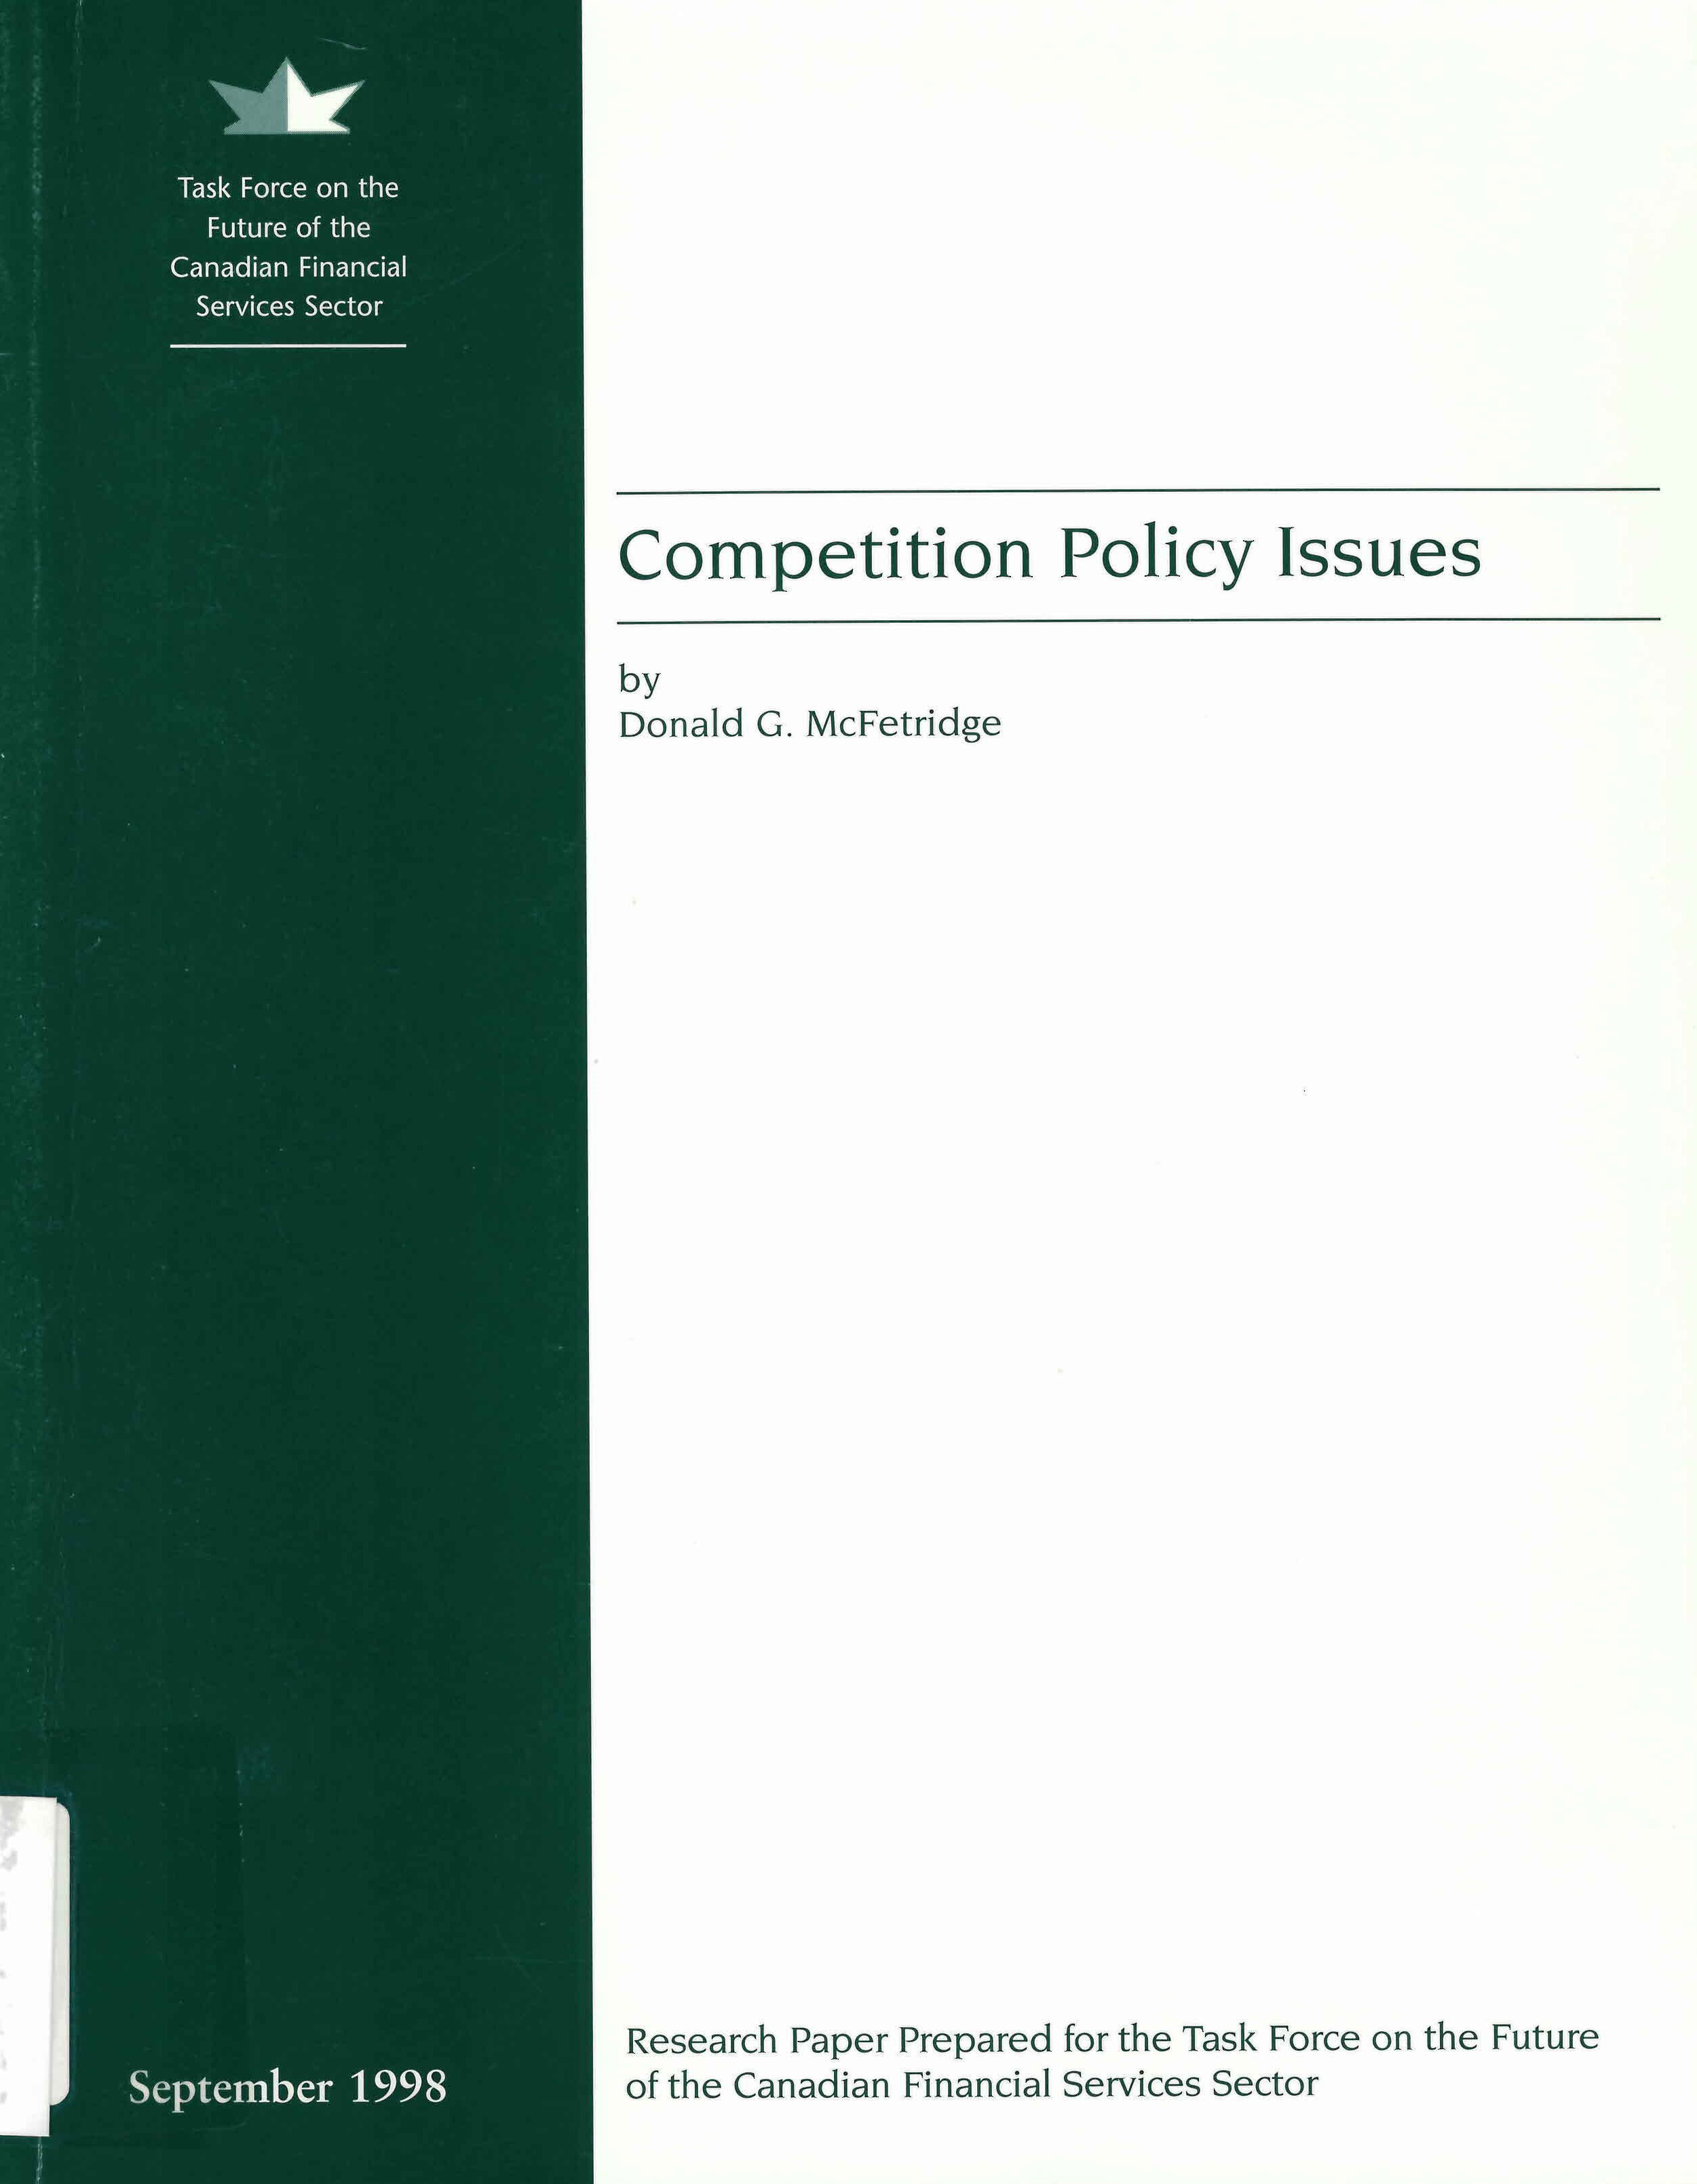 Competition policy issues